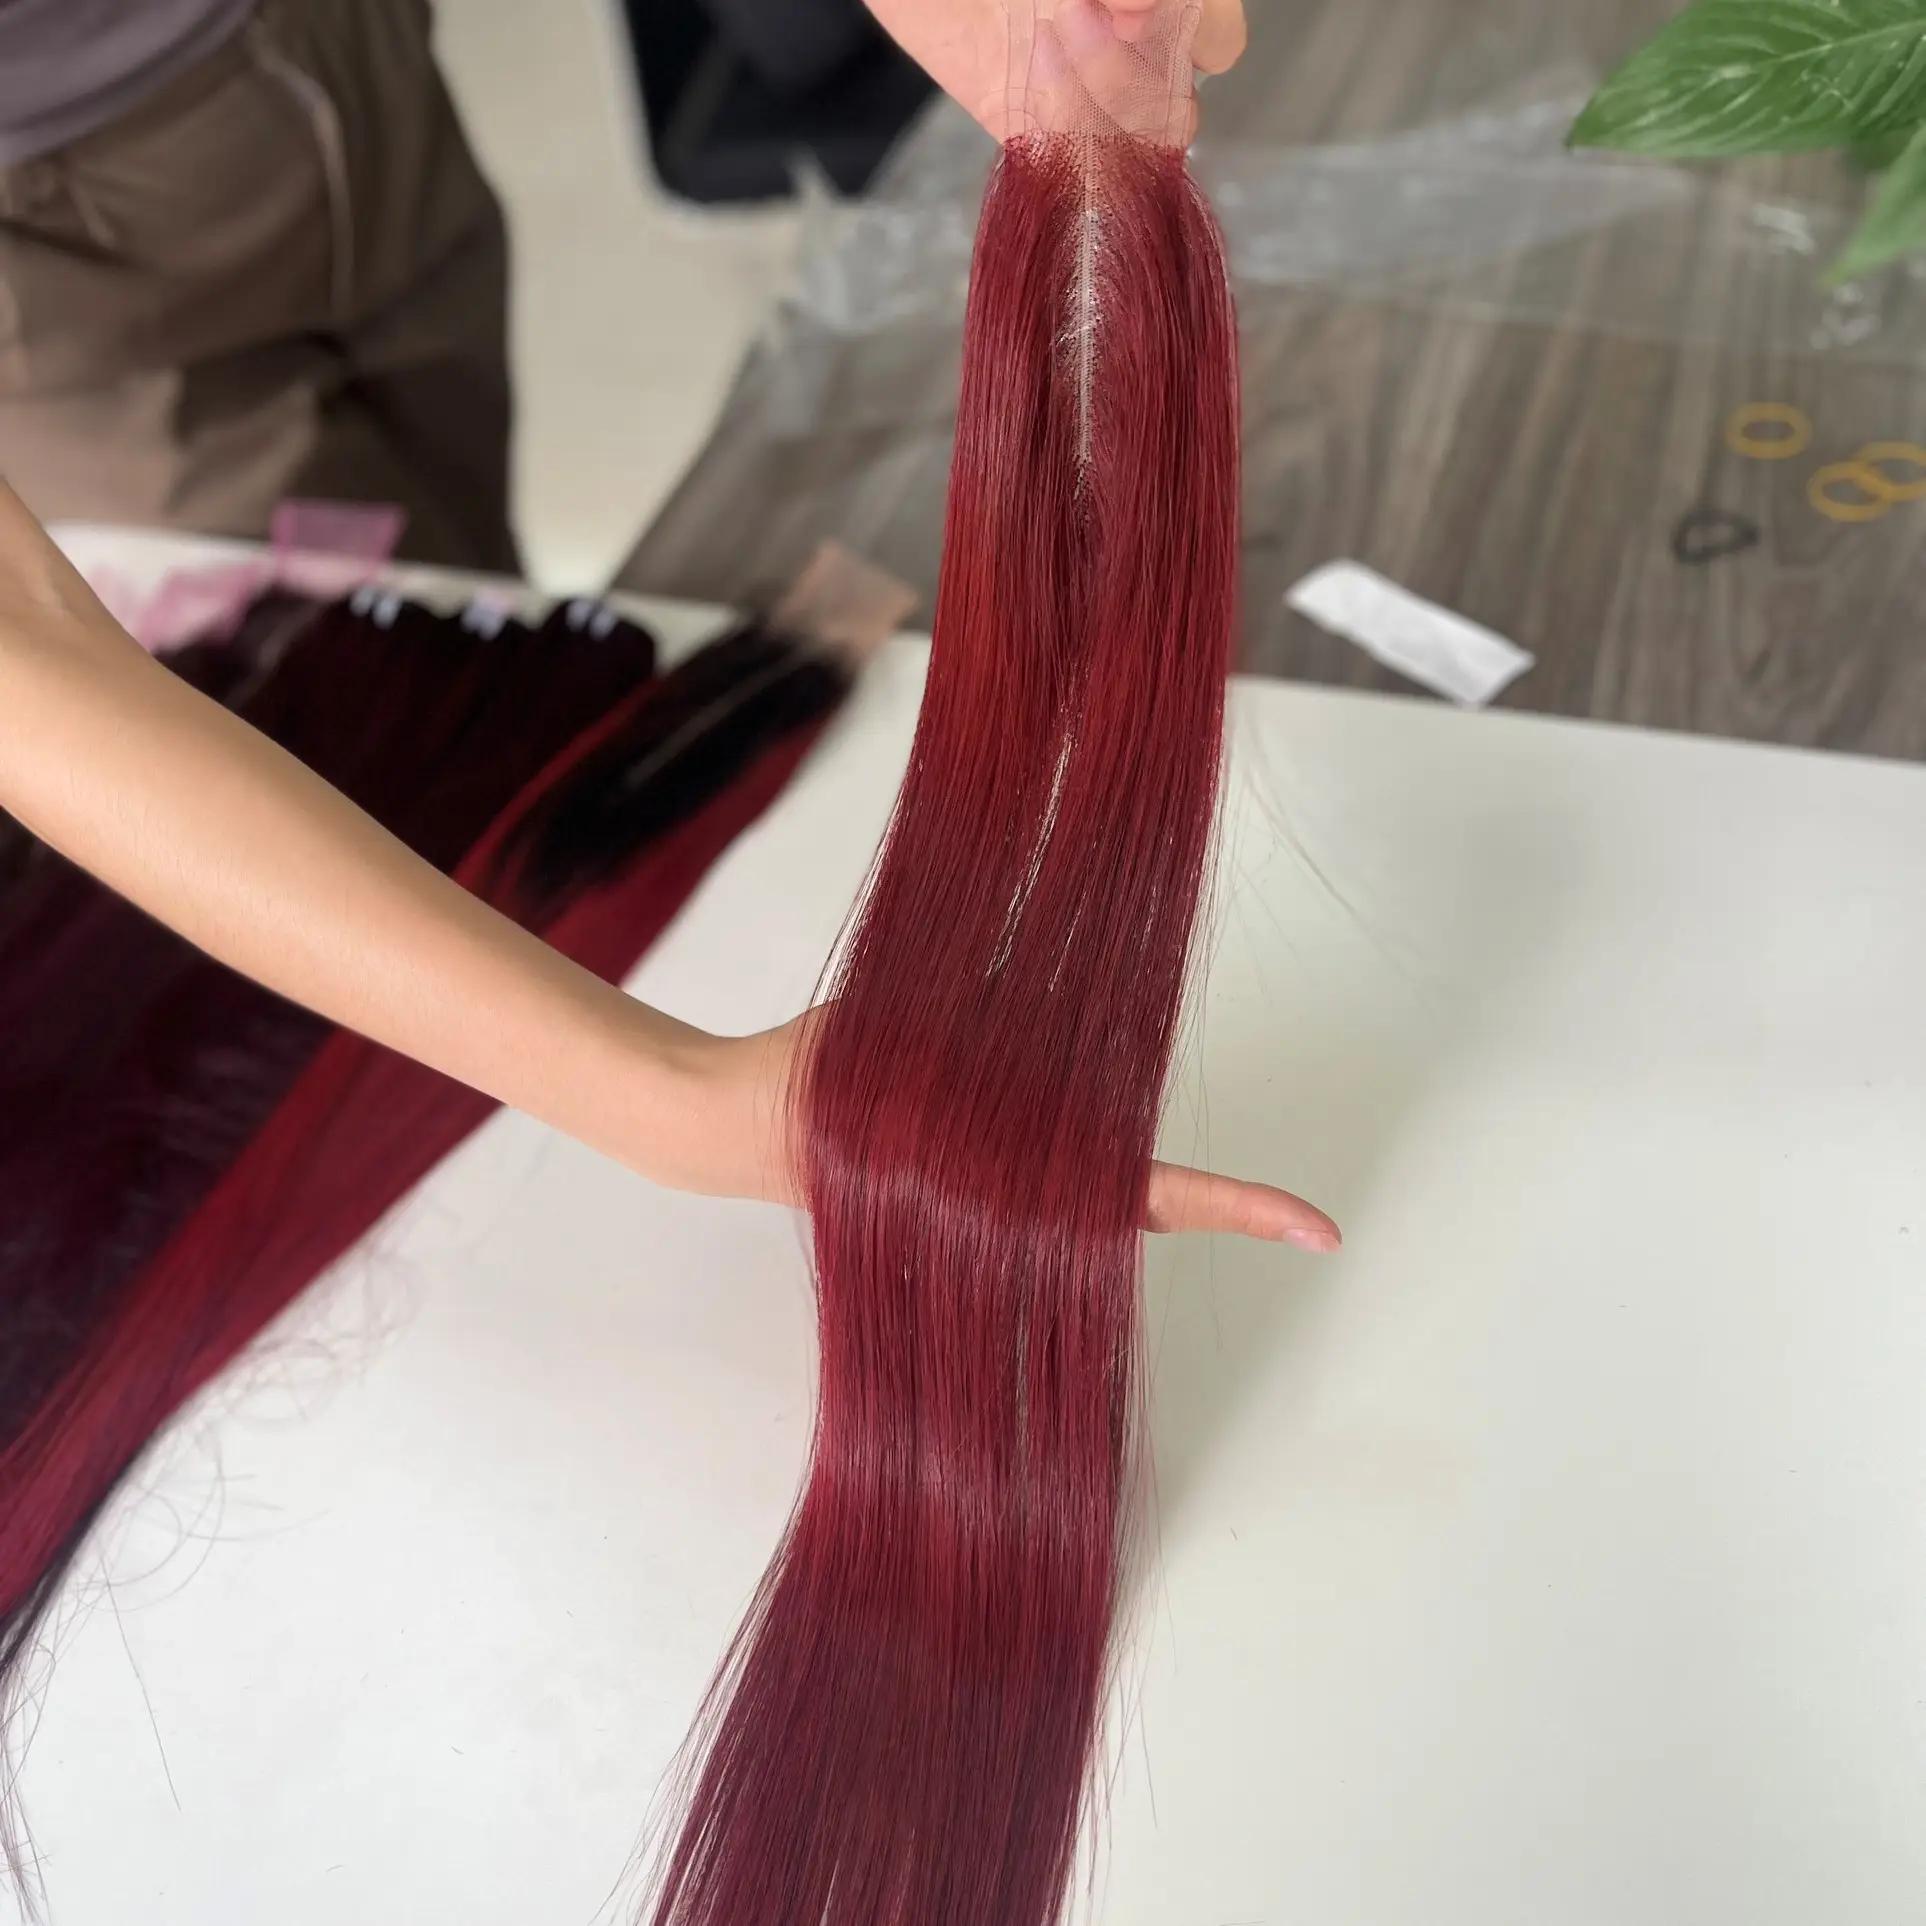 Silky Straight Wave Lace Closure and Frontal Wig 2*4 Bone Straight Red Wine Tone Hair Extensions From Vietnamese Human Hair